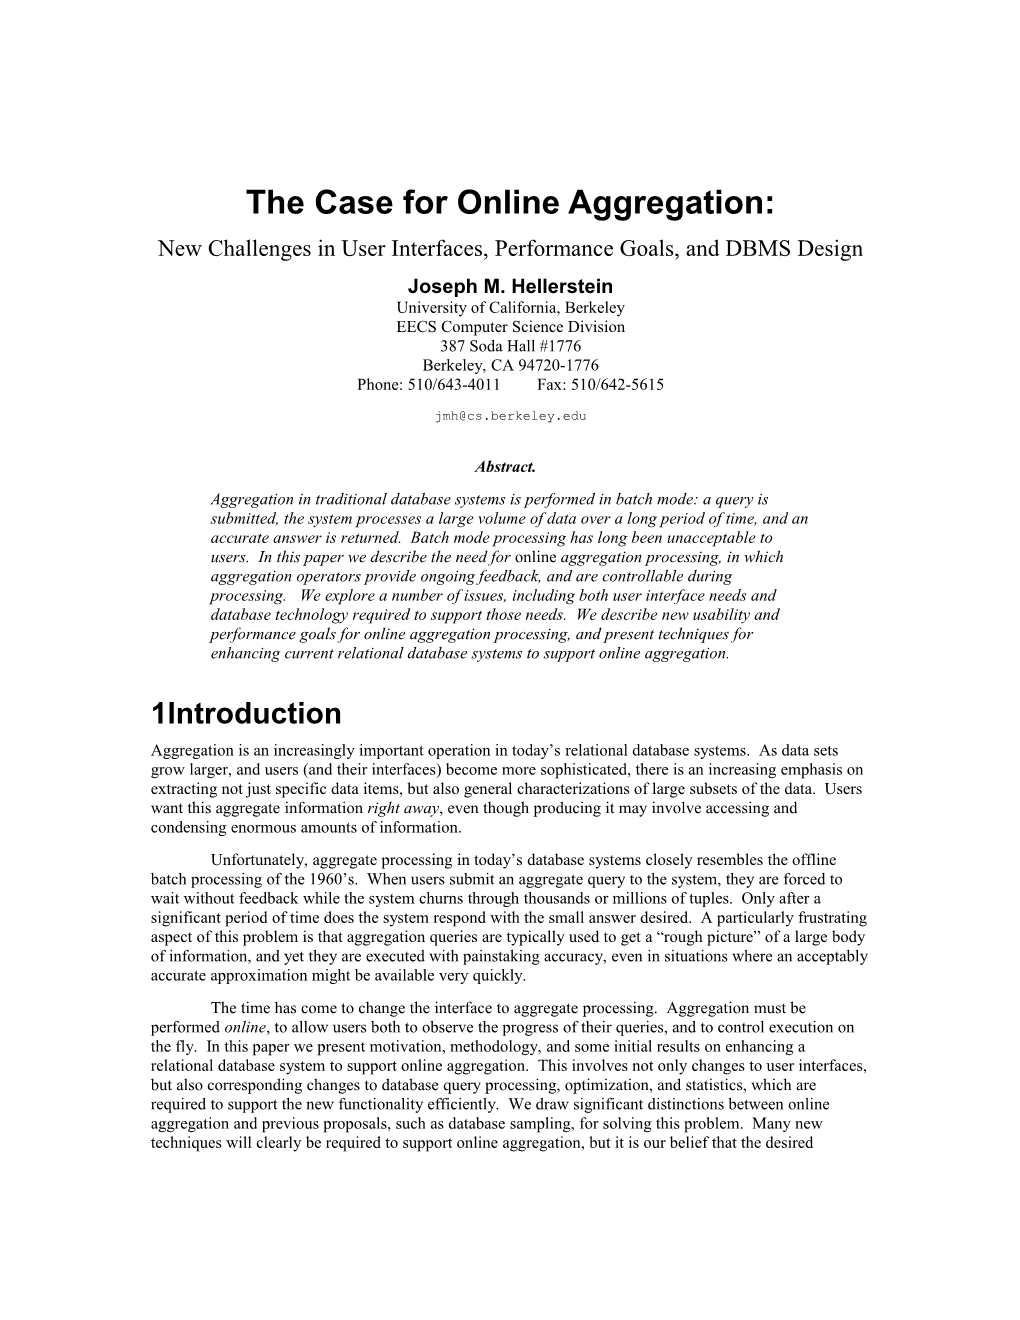 The Case for Open Aggregation